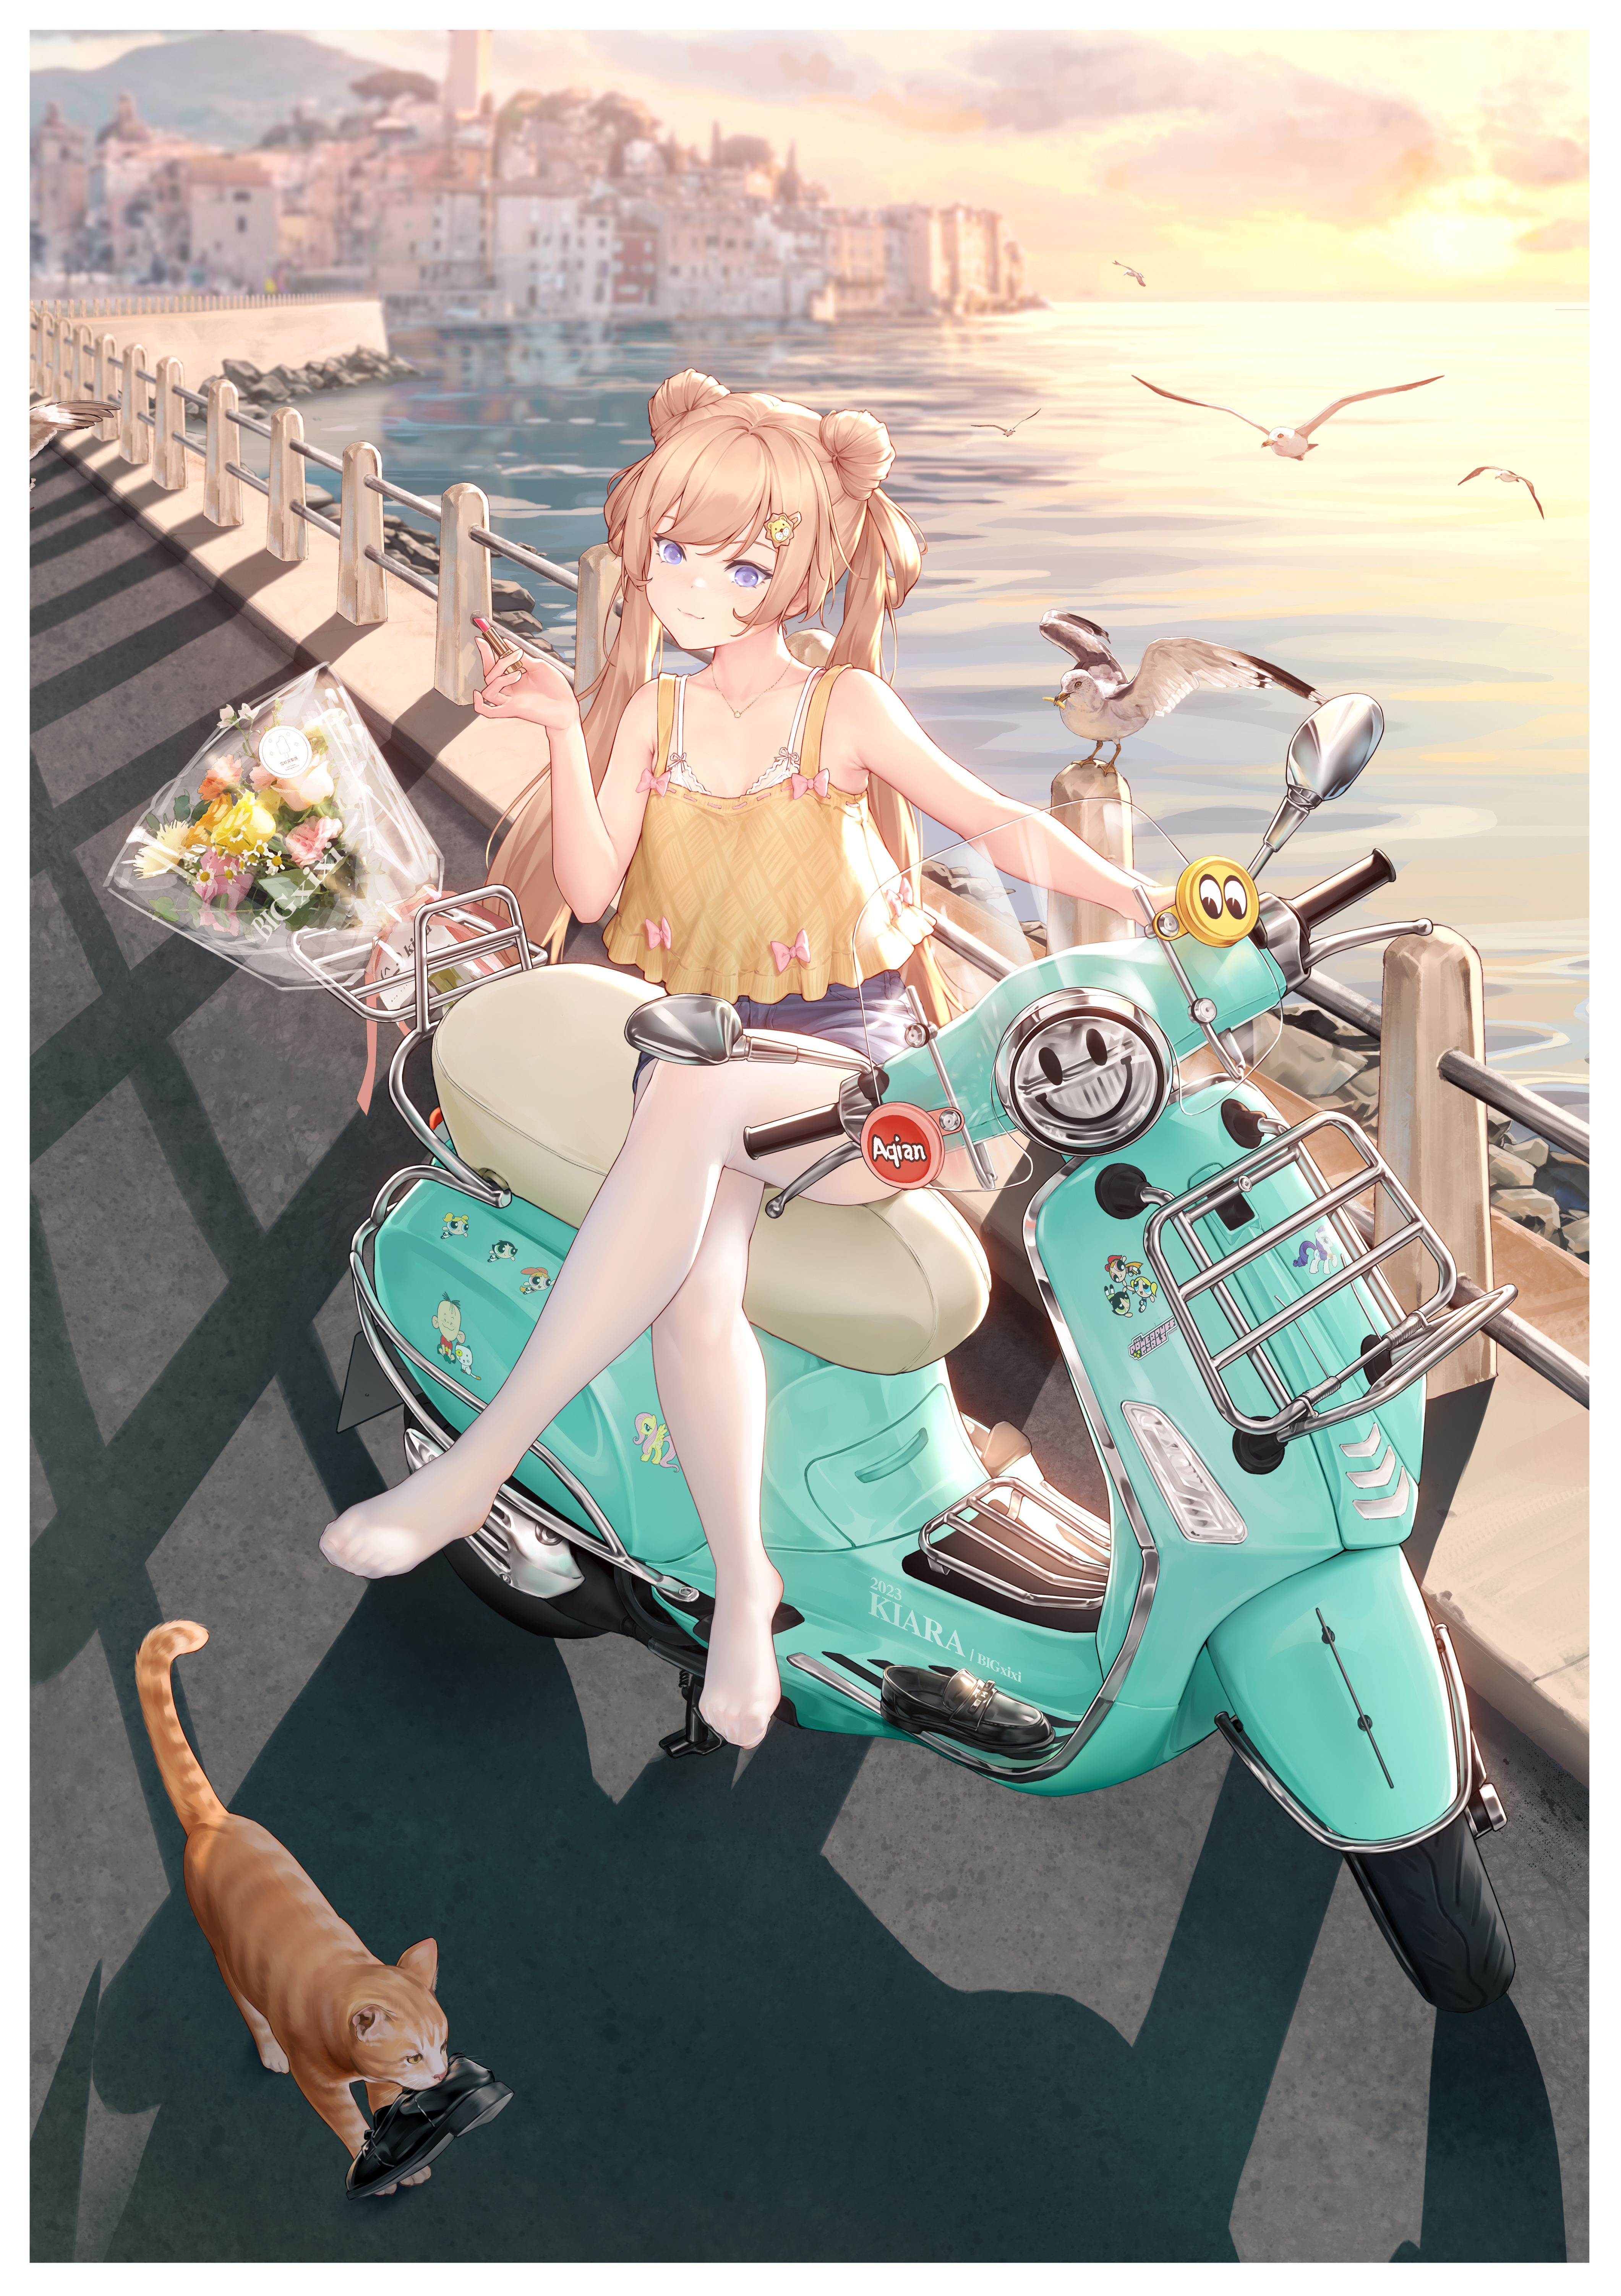 Anime 4242x6009 Pixiv anime portrait display anime girls vehicle flowers sunset sunset glow water city cats animals shoes legs crossed birds shadow hairbun clouds sky frontal view Bigxixi scooters